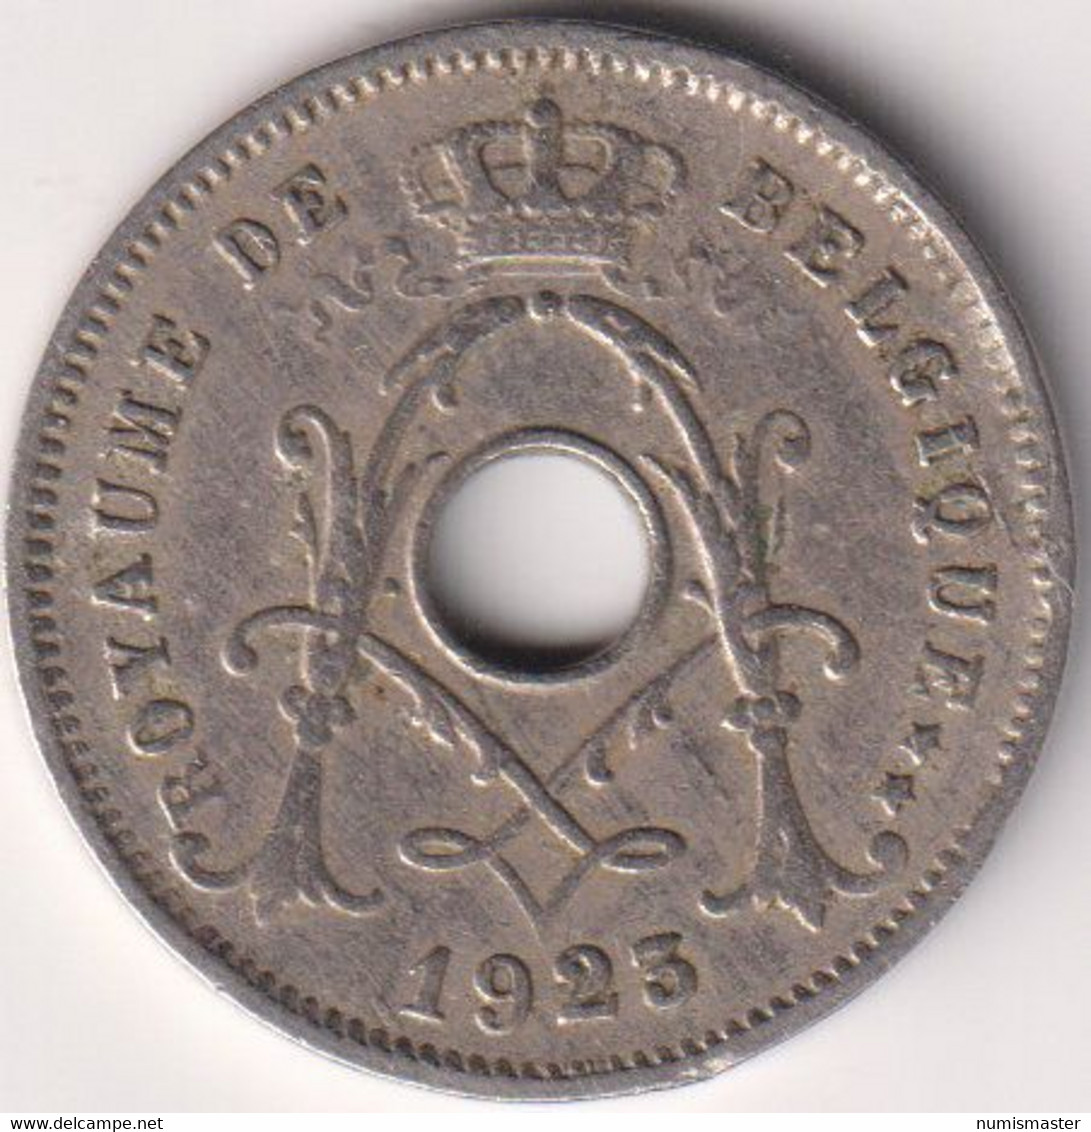 BELGIUM , 5 CENTIMES 1923, FRENCH - 2 Cents